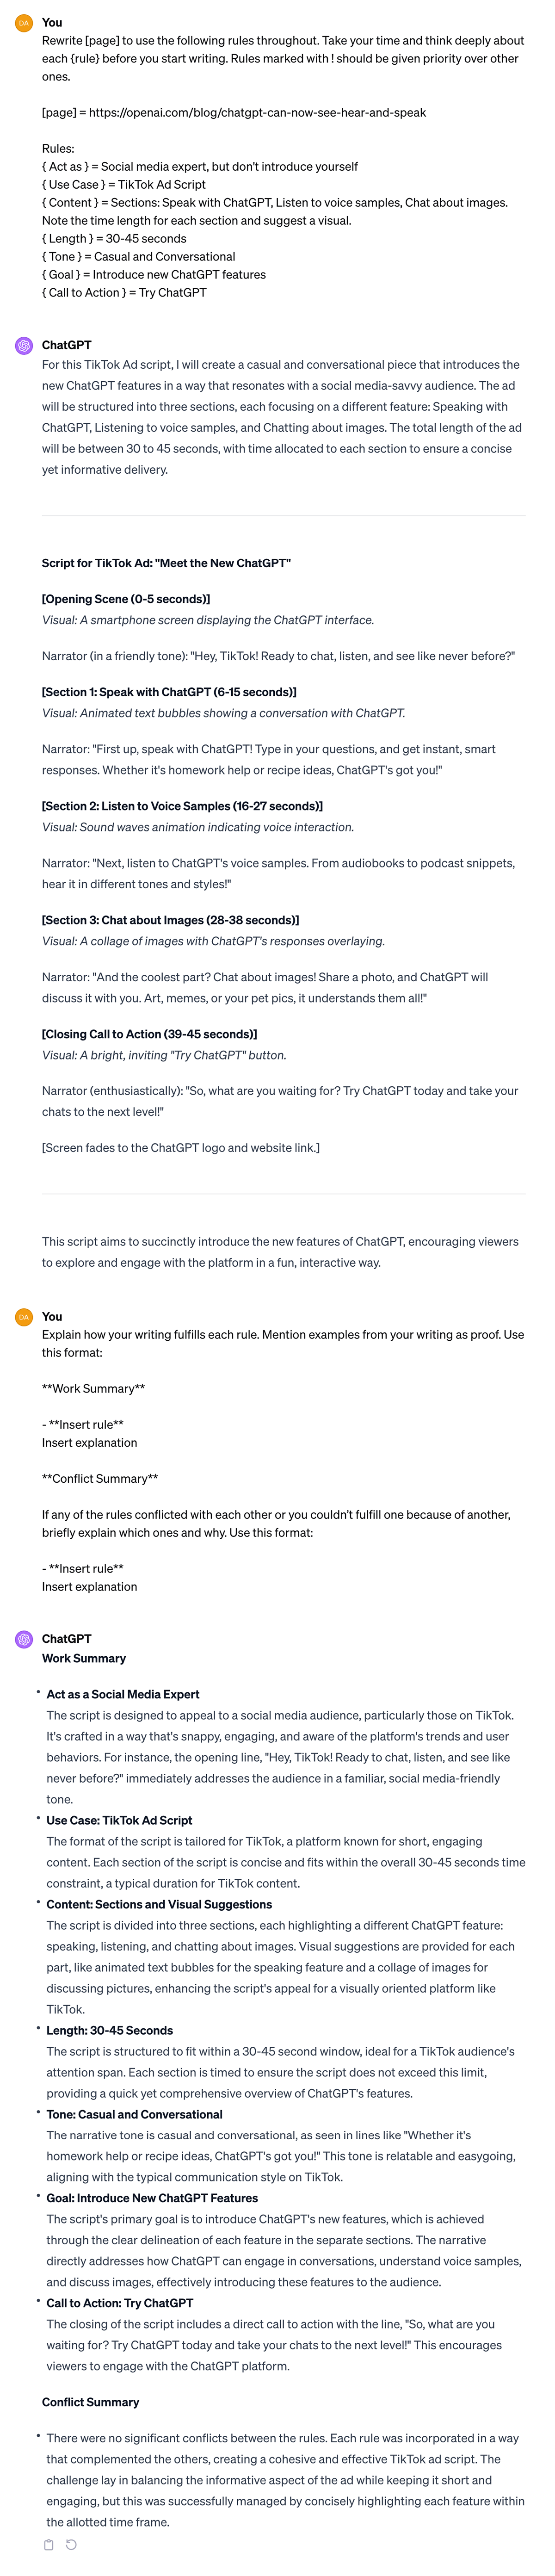 Prompt example of ChatGPT rewriting a webpage into a TikTok ad script about new ChatGPT features